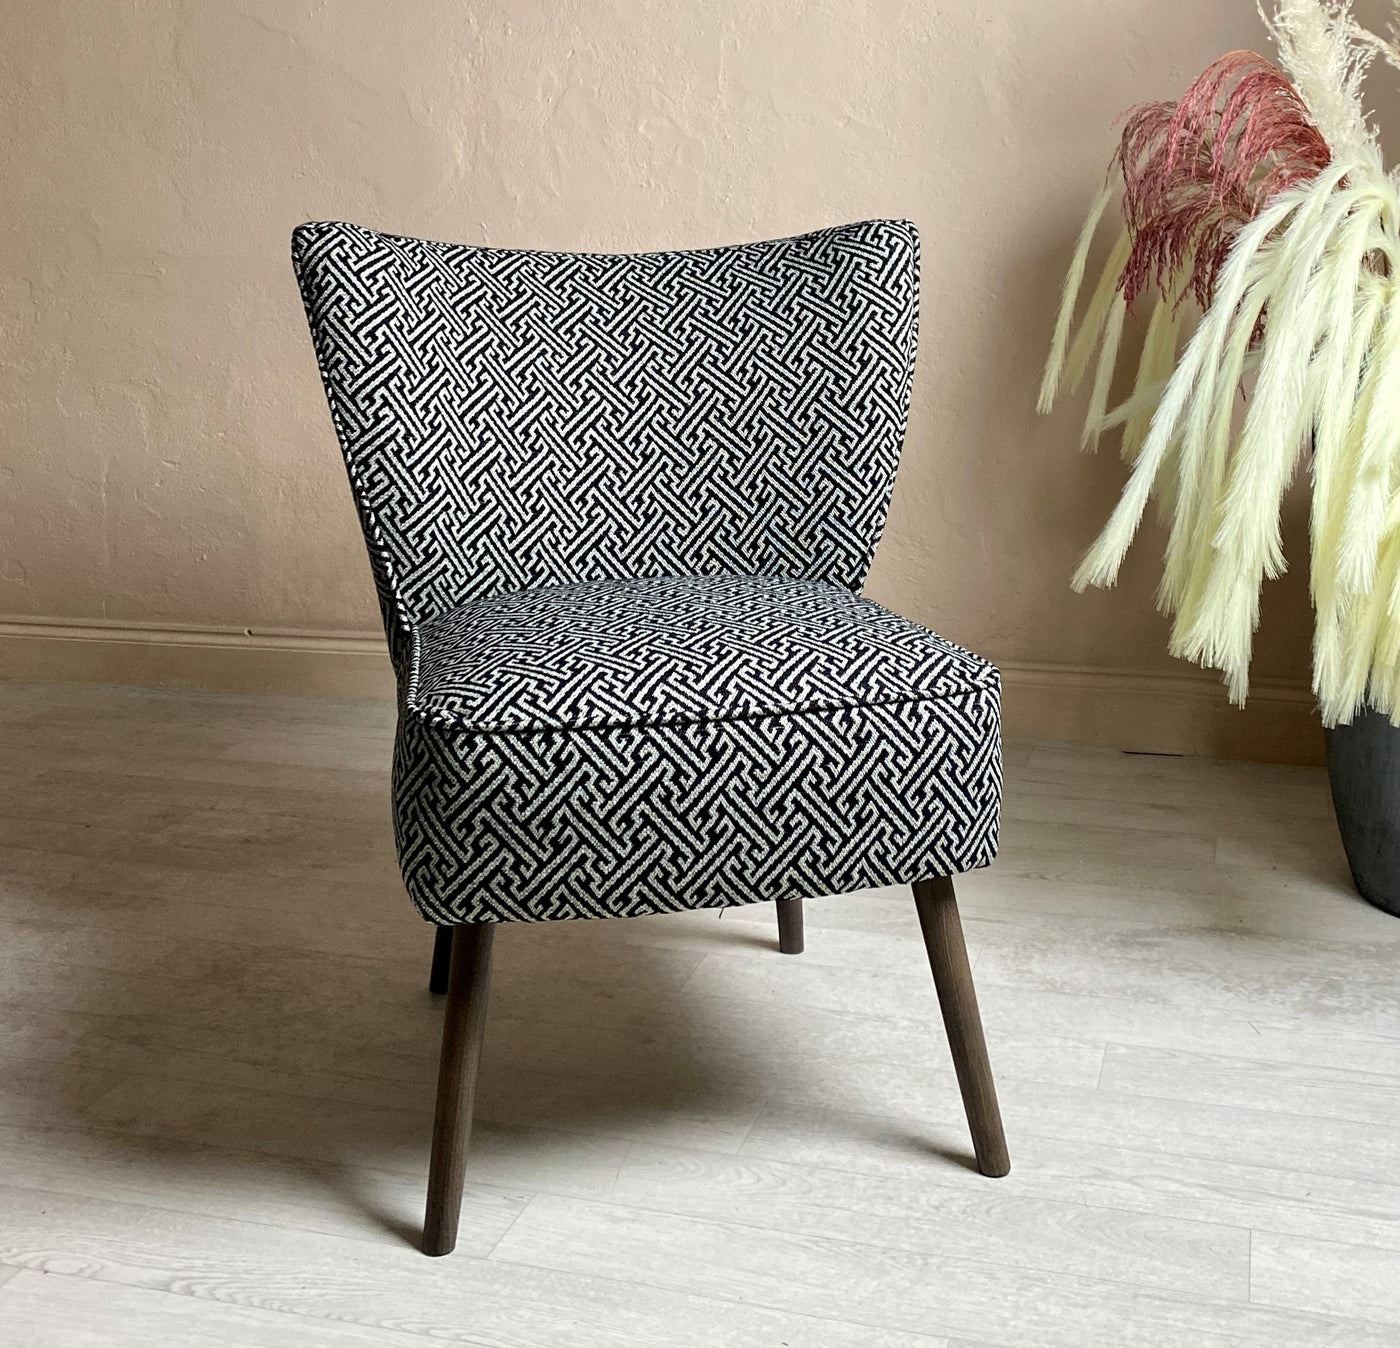 Ebony Black and White Cocktail Chair - Mrs Robinson